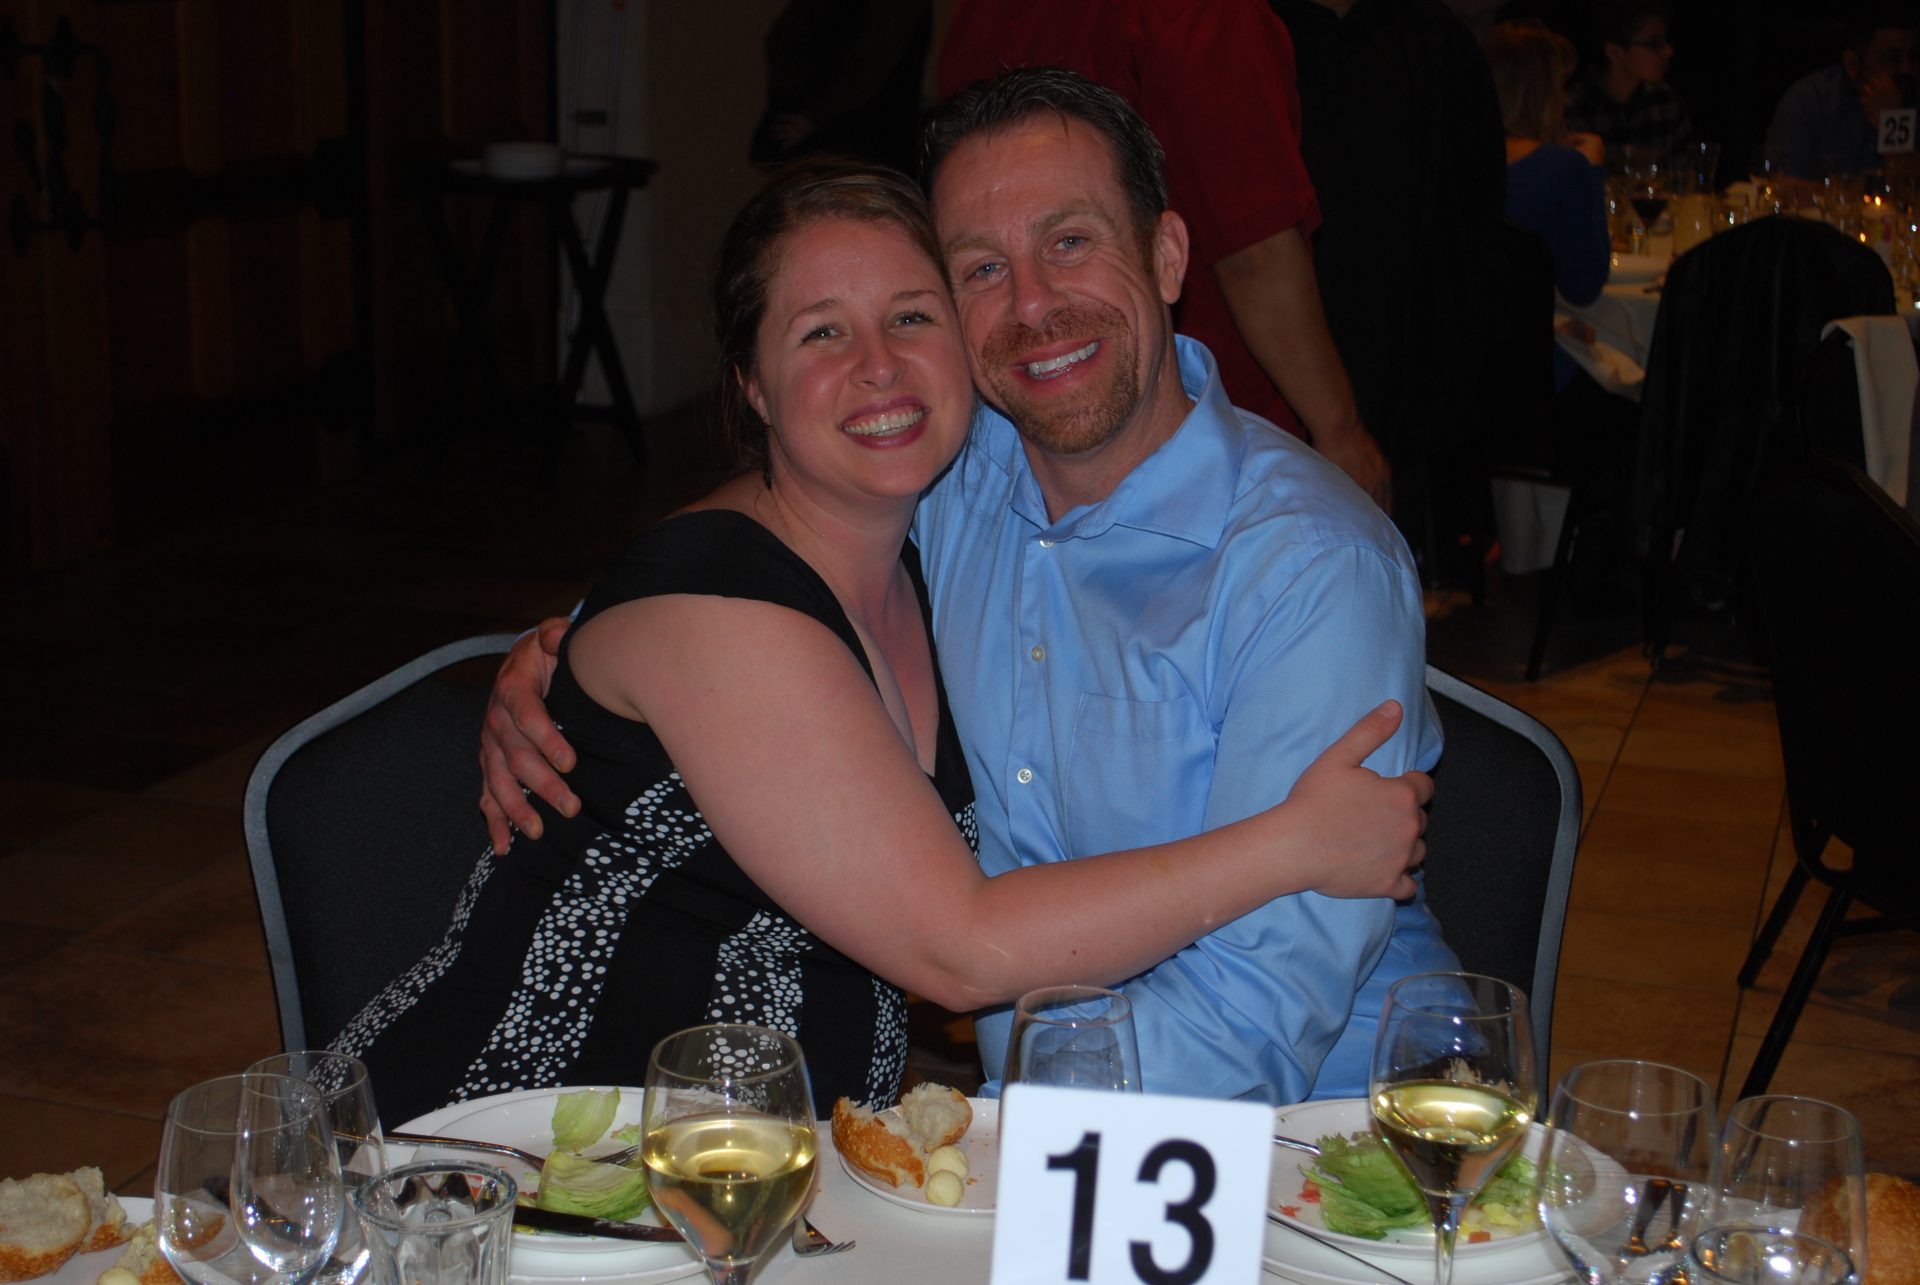 Image from the Gallery: VAC Banquet – Livermore, CA